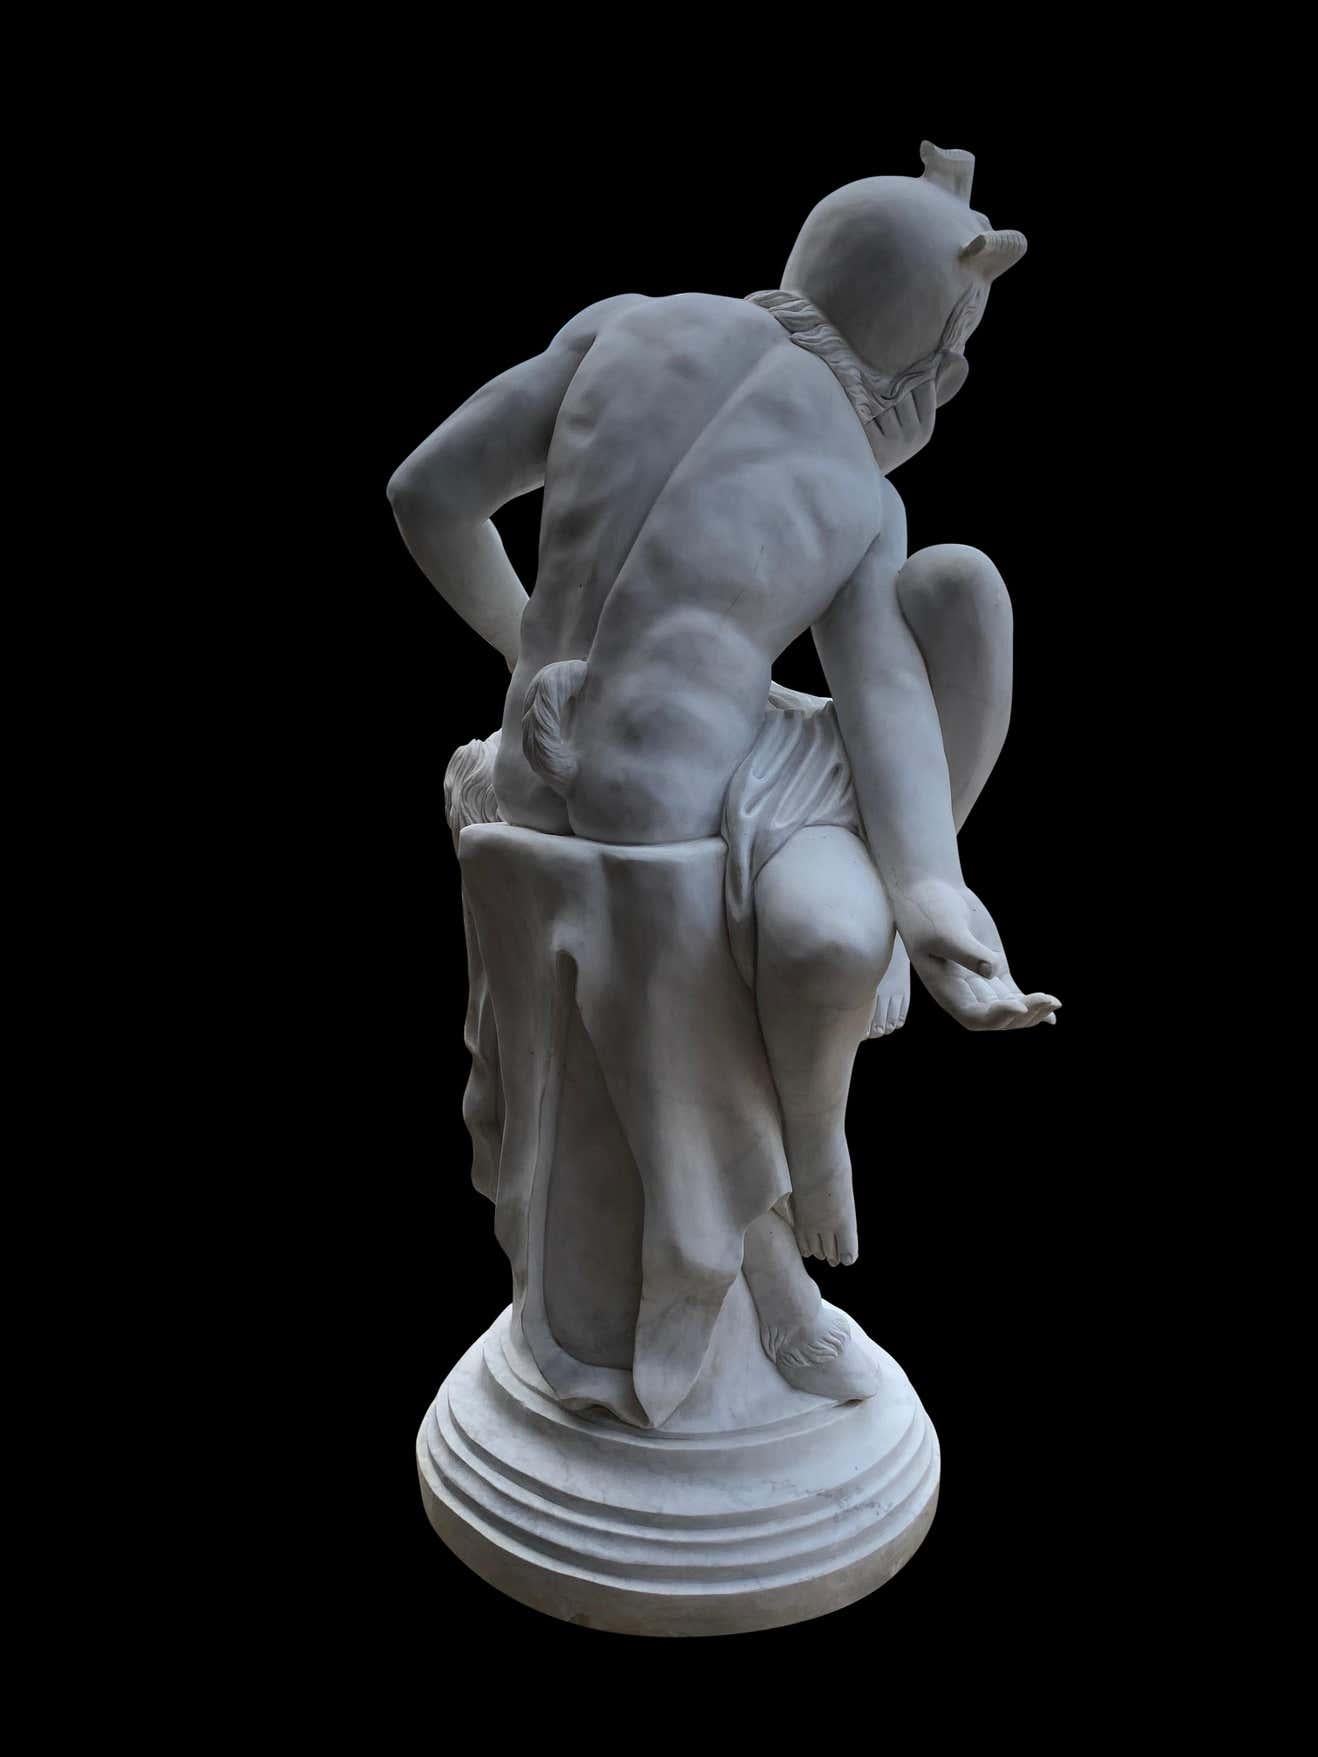 European 20th Century Life-Sized Sculpture of Pan the Ancient Greek God of Sexuality For Sale